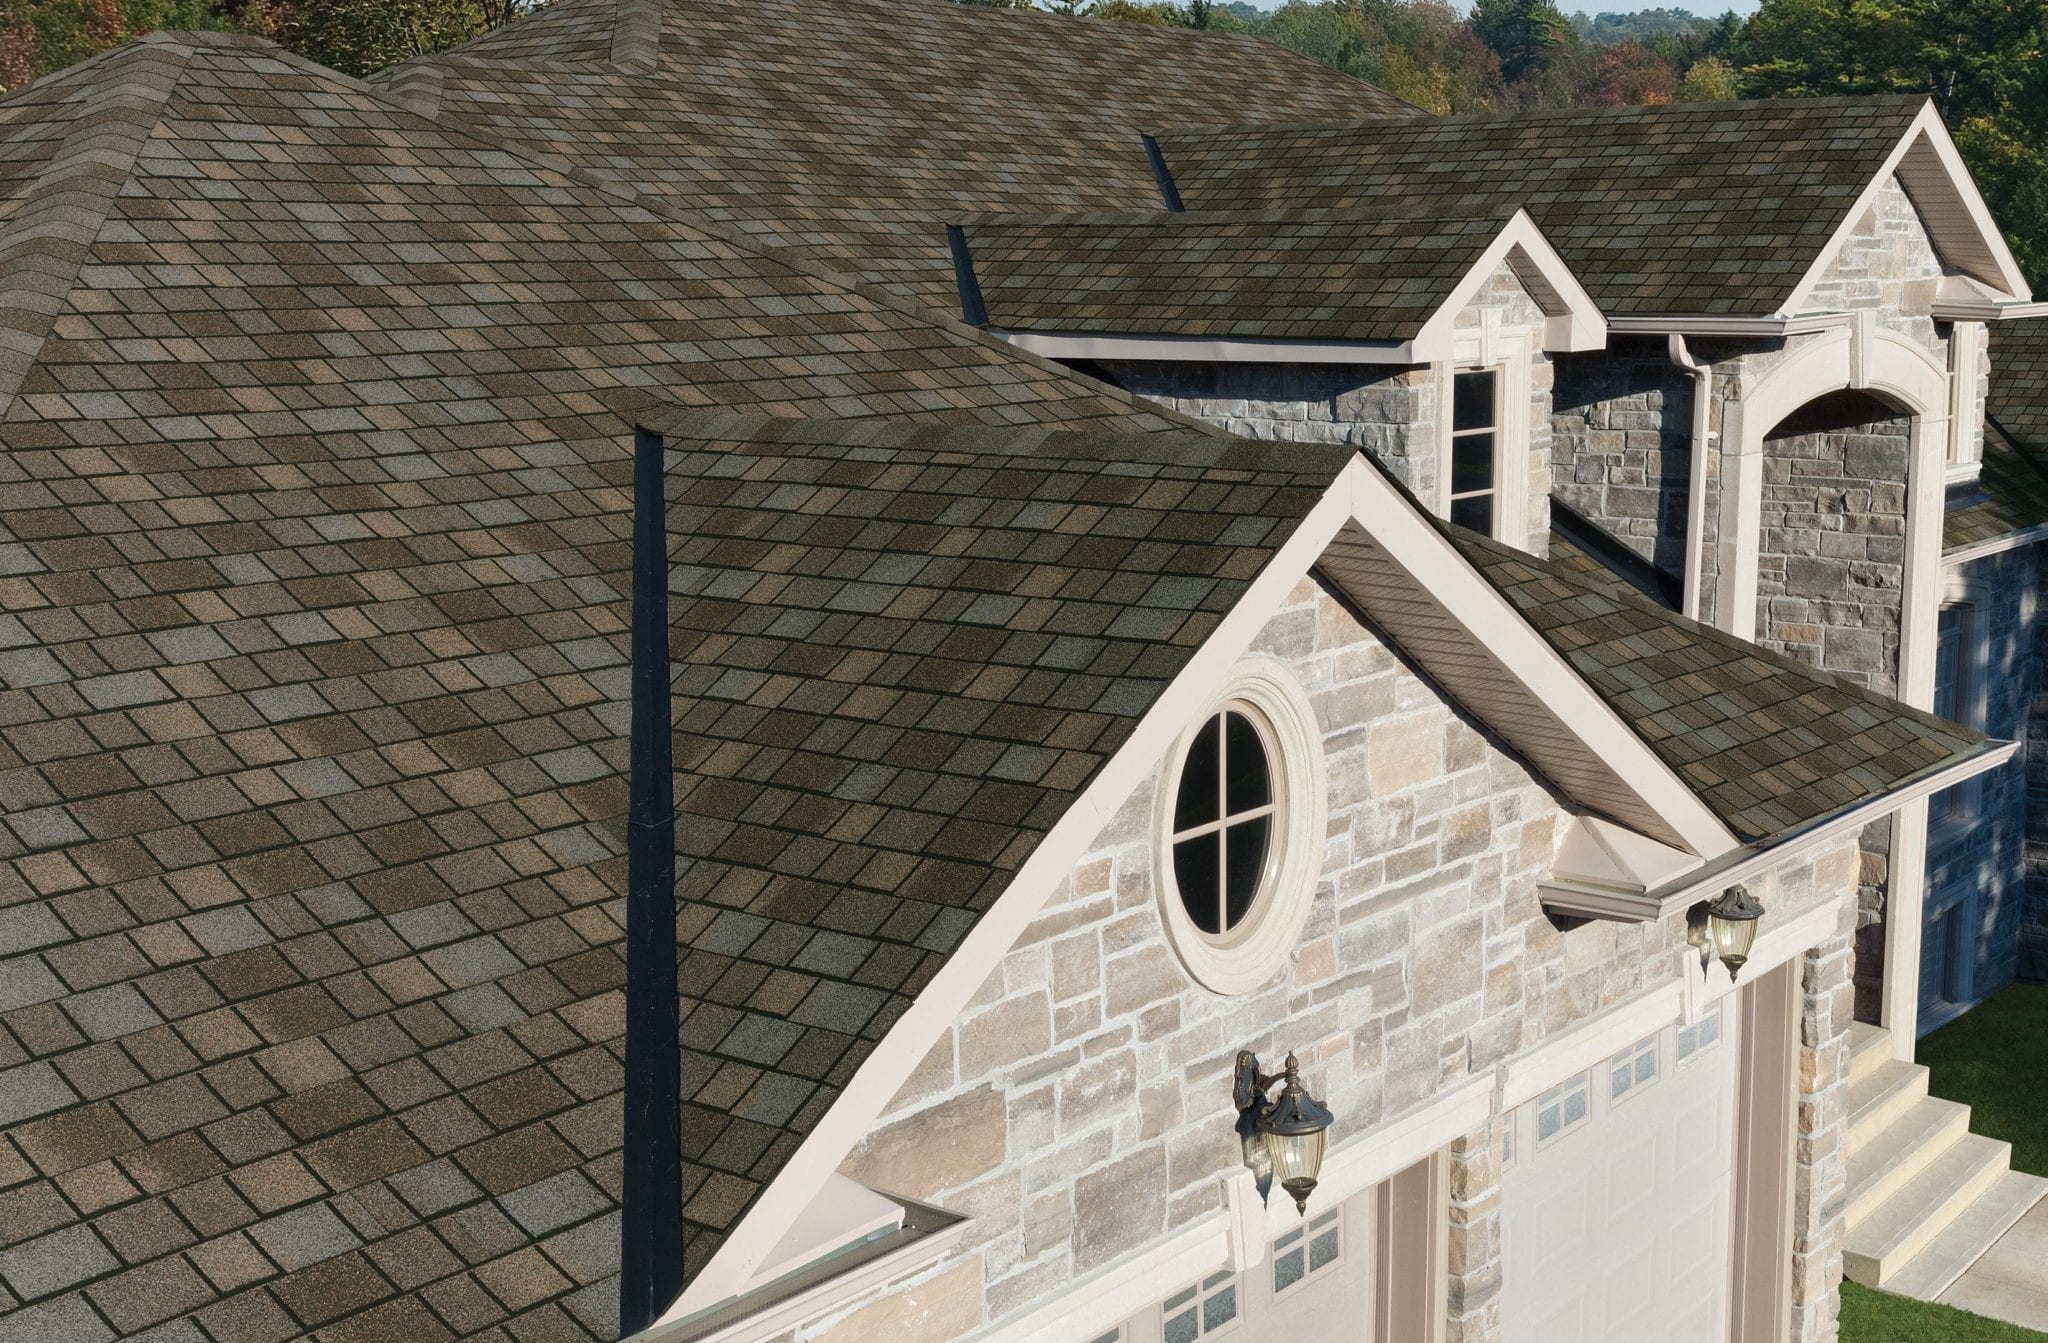 IKO Royal Estate Harvest Slate shingles on a roof with three gable sections